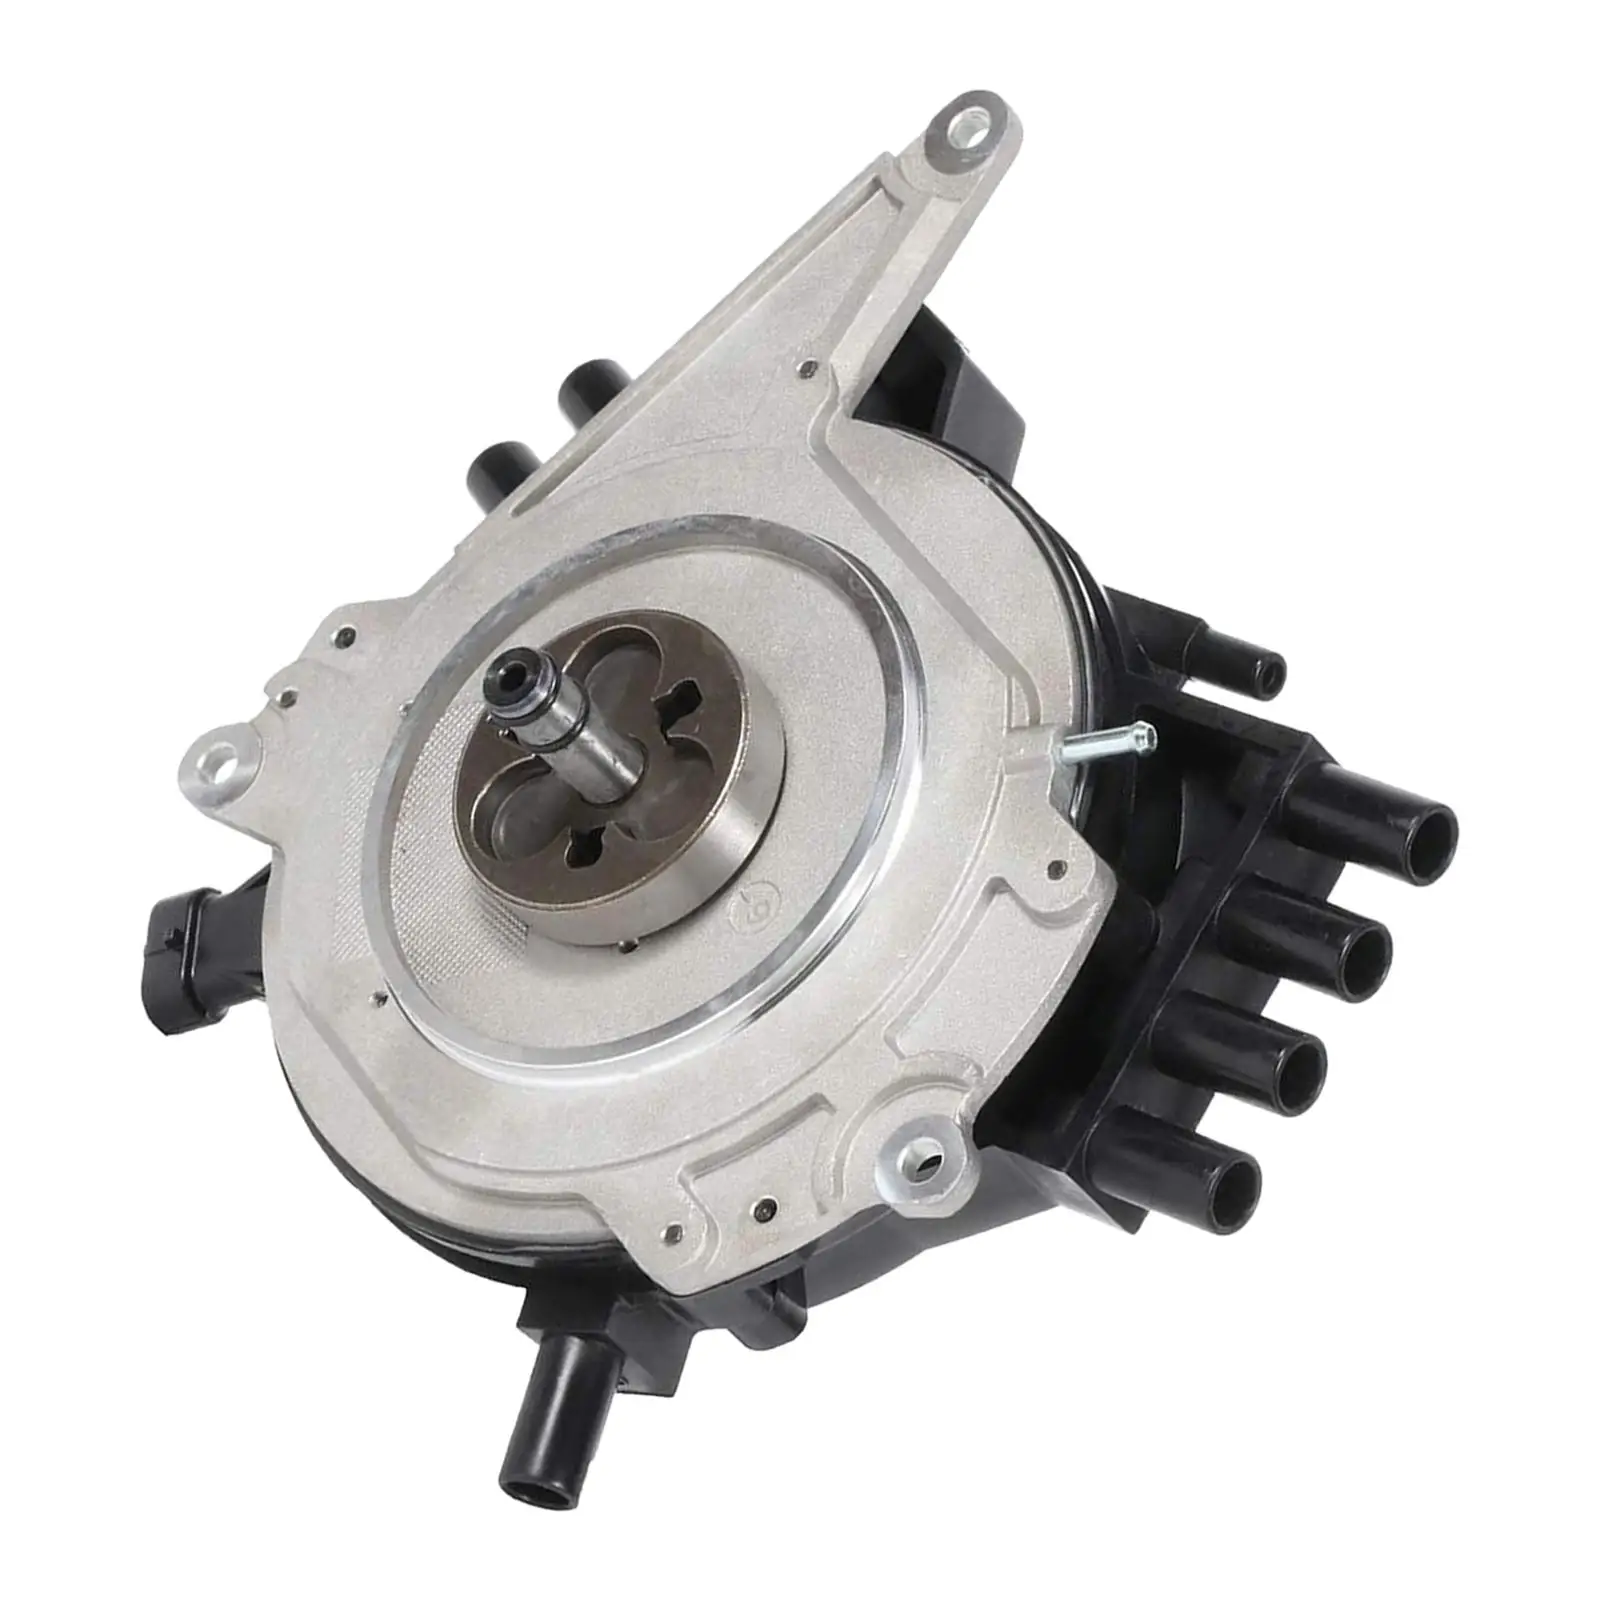 Ignition Distributor Direct Replaces 1104032 19212300 for Pontiac Firebird V8 5.7L P 1995-1997 Durable Easy to Install